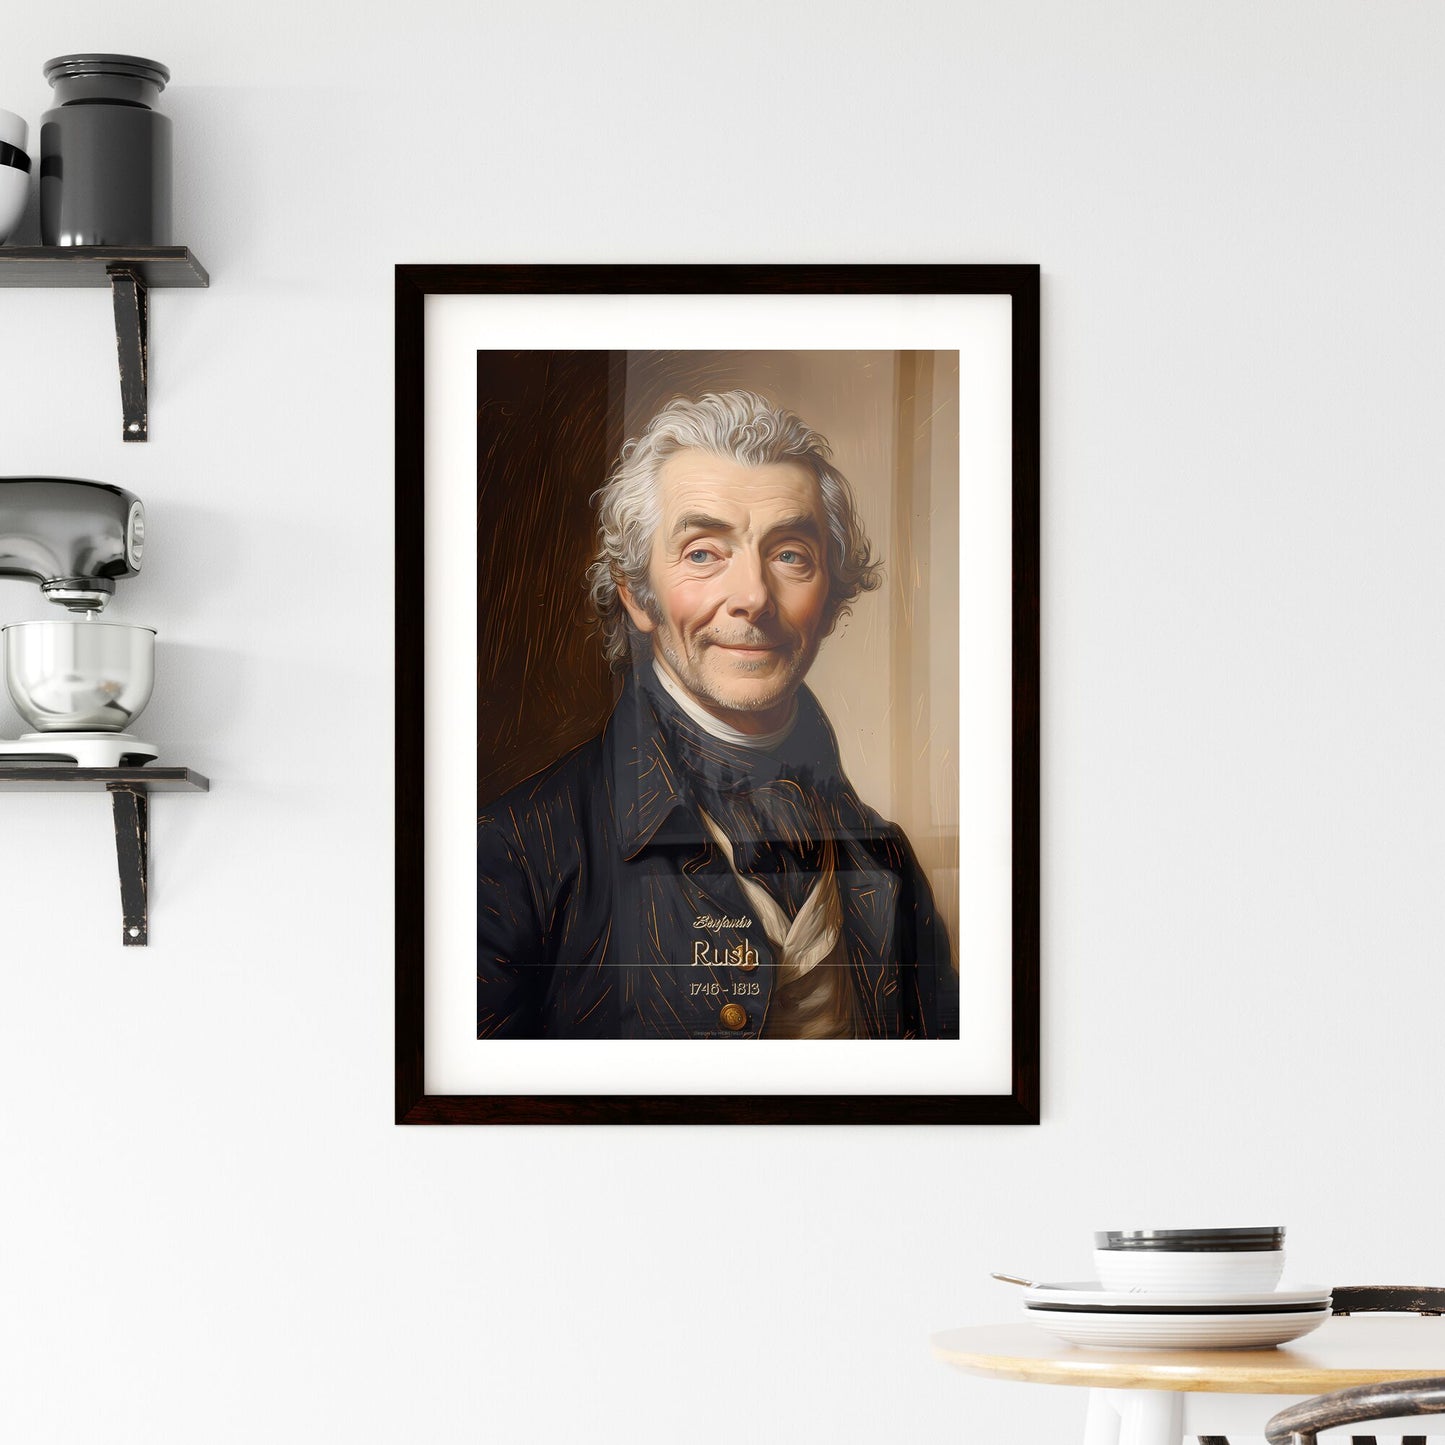 Benjamin, Rush, 1746 - 1813, A Poster of a man with white hair and a black coat Default Title